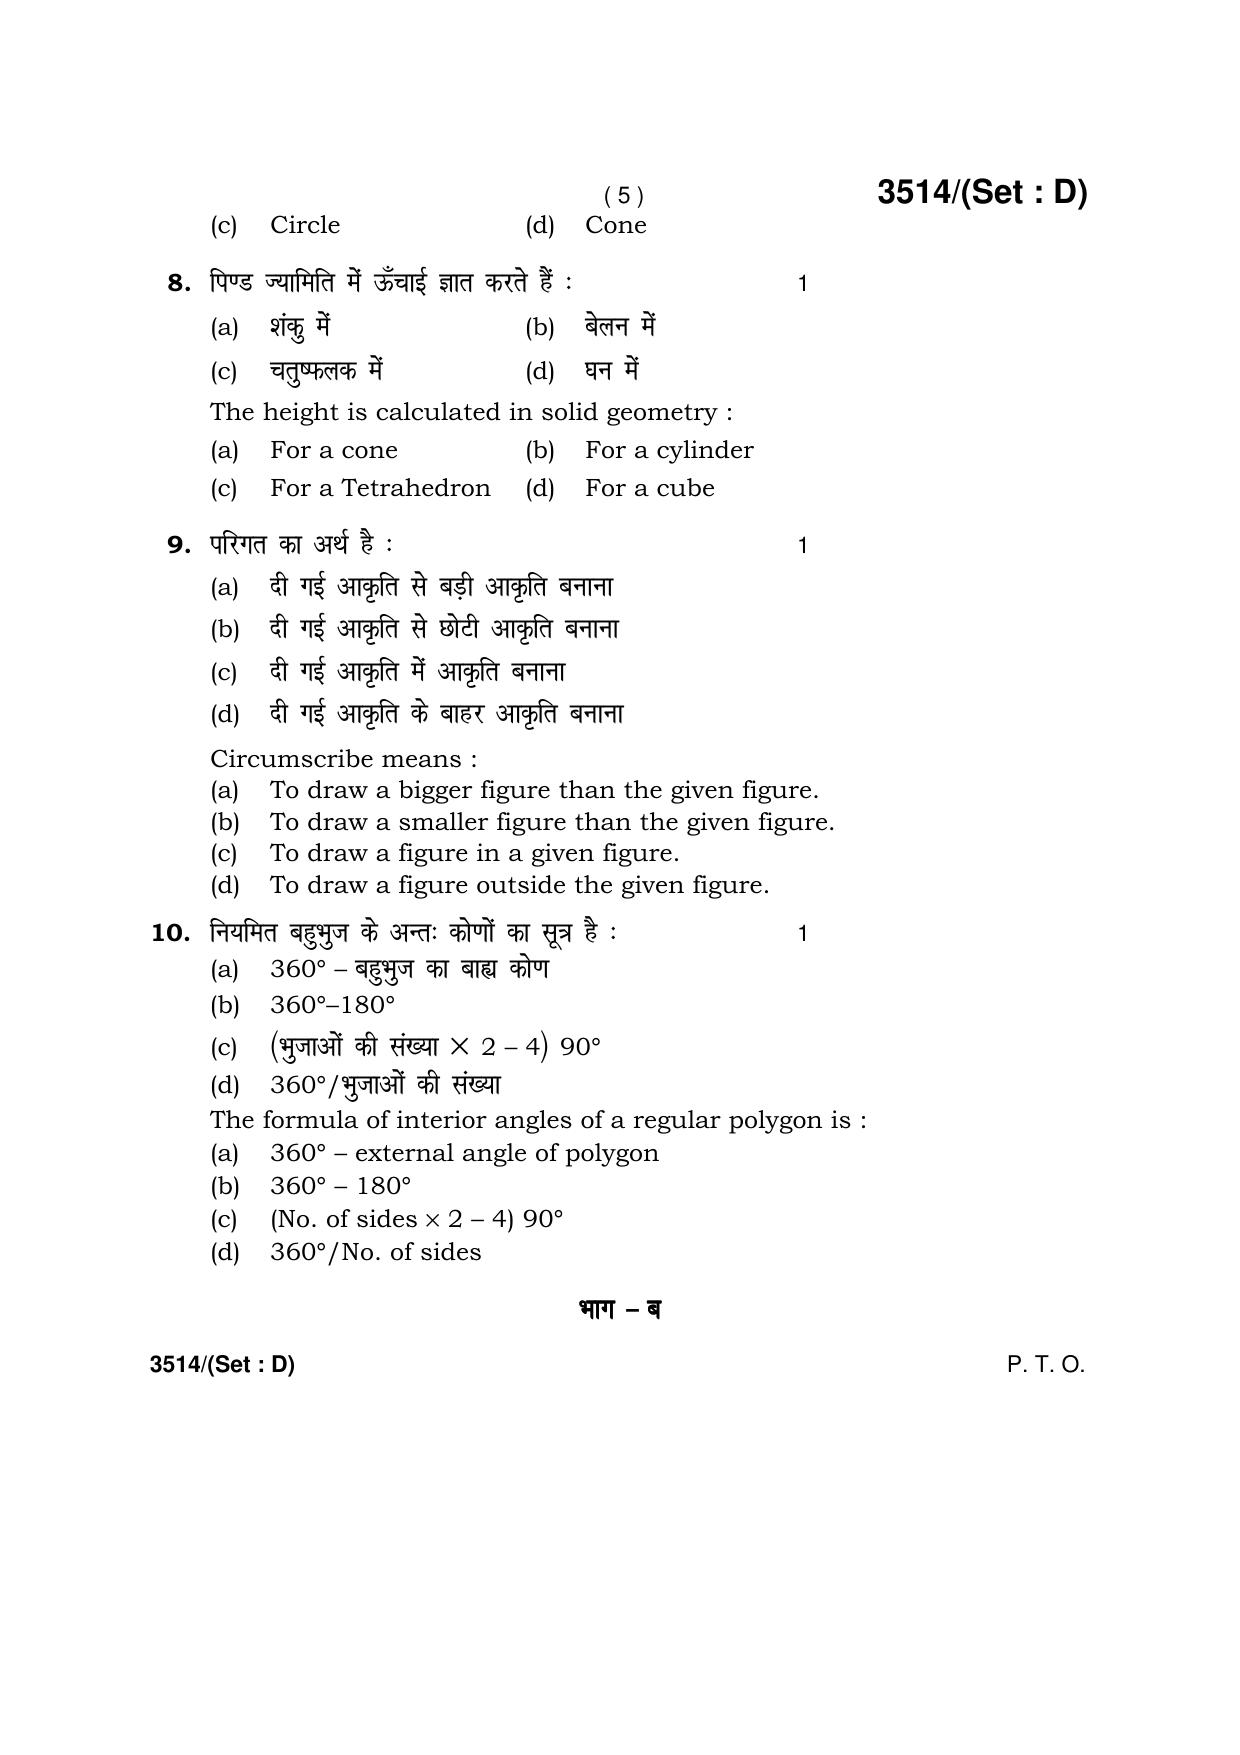 Haryana Board HBSE Class 10 Drawing -D 2018 Question Paper - Page 5